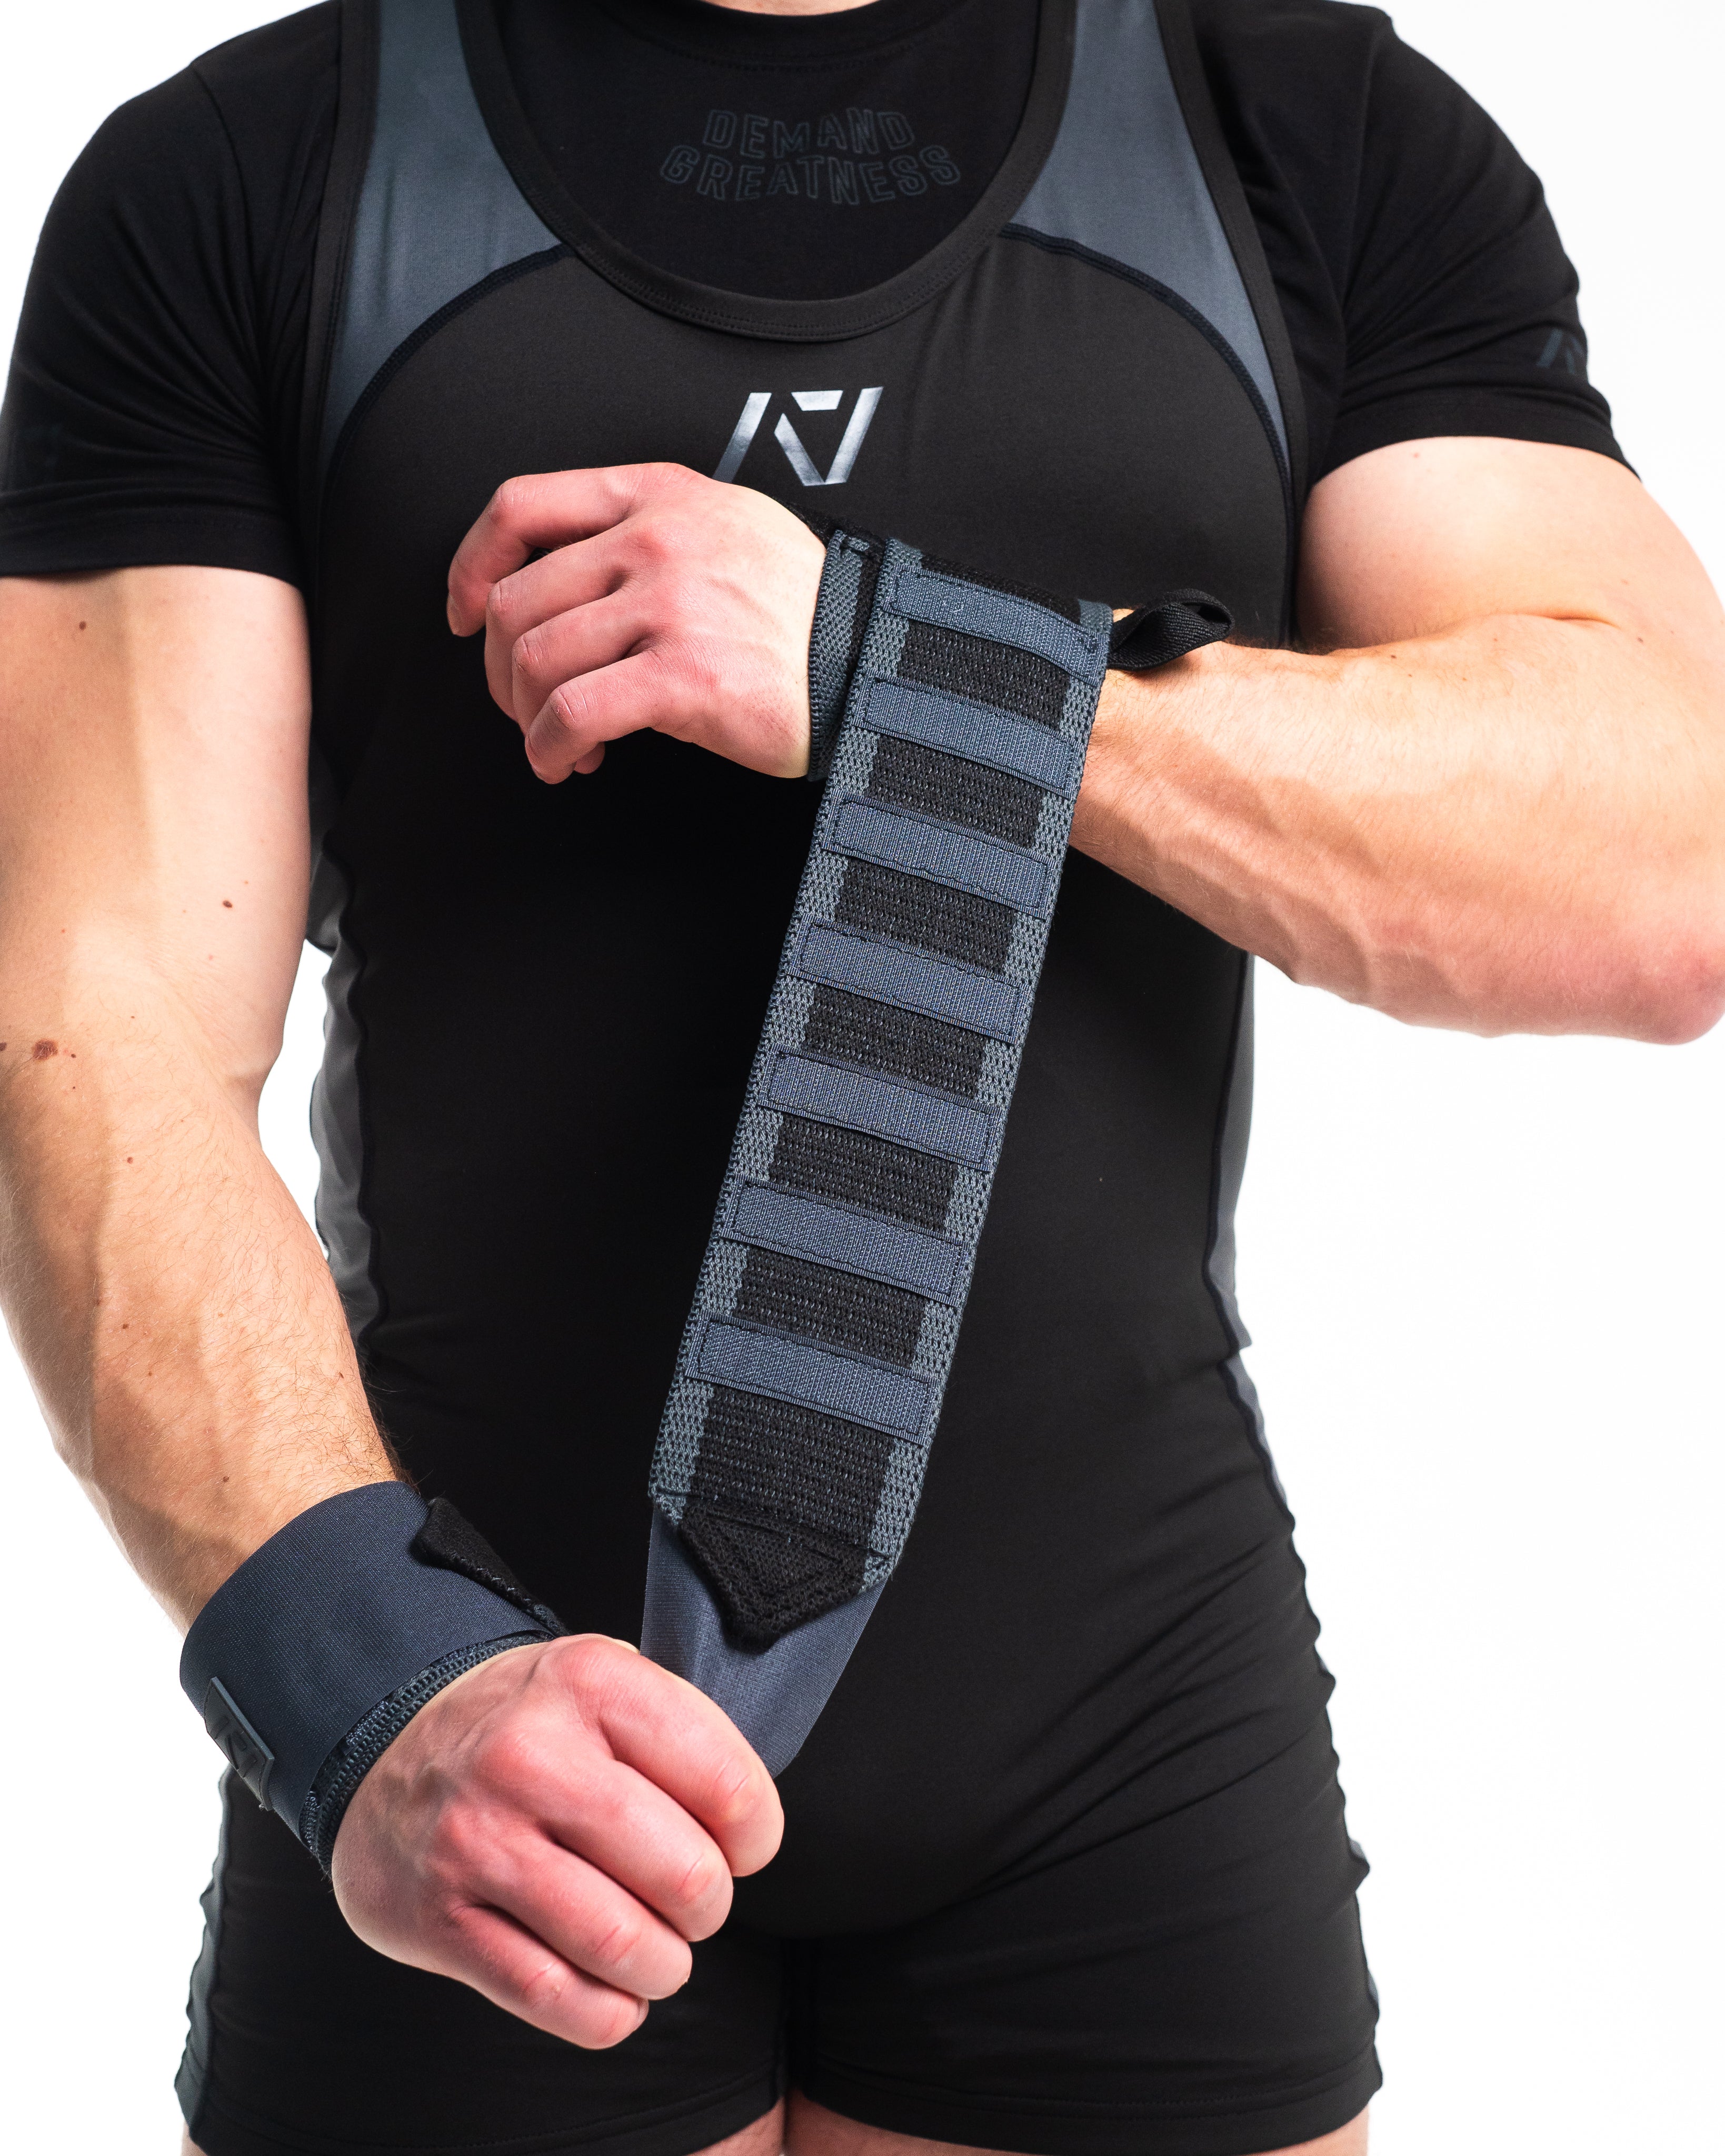 A7 IPF Approved Zebra Wraps feature strips of velcro on the wraps, allowing Zebra Wraps to conform fully to your unique preference of tightness. We offer Zebra wrist wraps in 3 lengths and 4 stiffnesses (Flexi, Mids, Stiff, and Rigor Mortis). The IPF Approved Kit includes Powerlifting Singlet, A7 Meet Shirt, A7 Deadlift Socks, Hourglass Knee Sleeves (Stiff Knee Sleeves and Rigor Mortis Knee Sleeves). Genouillères powerlifting shipping to France, Spain, Ireland, Germany, Italy, Sweden and EU. 